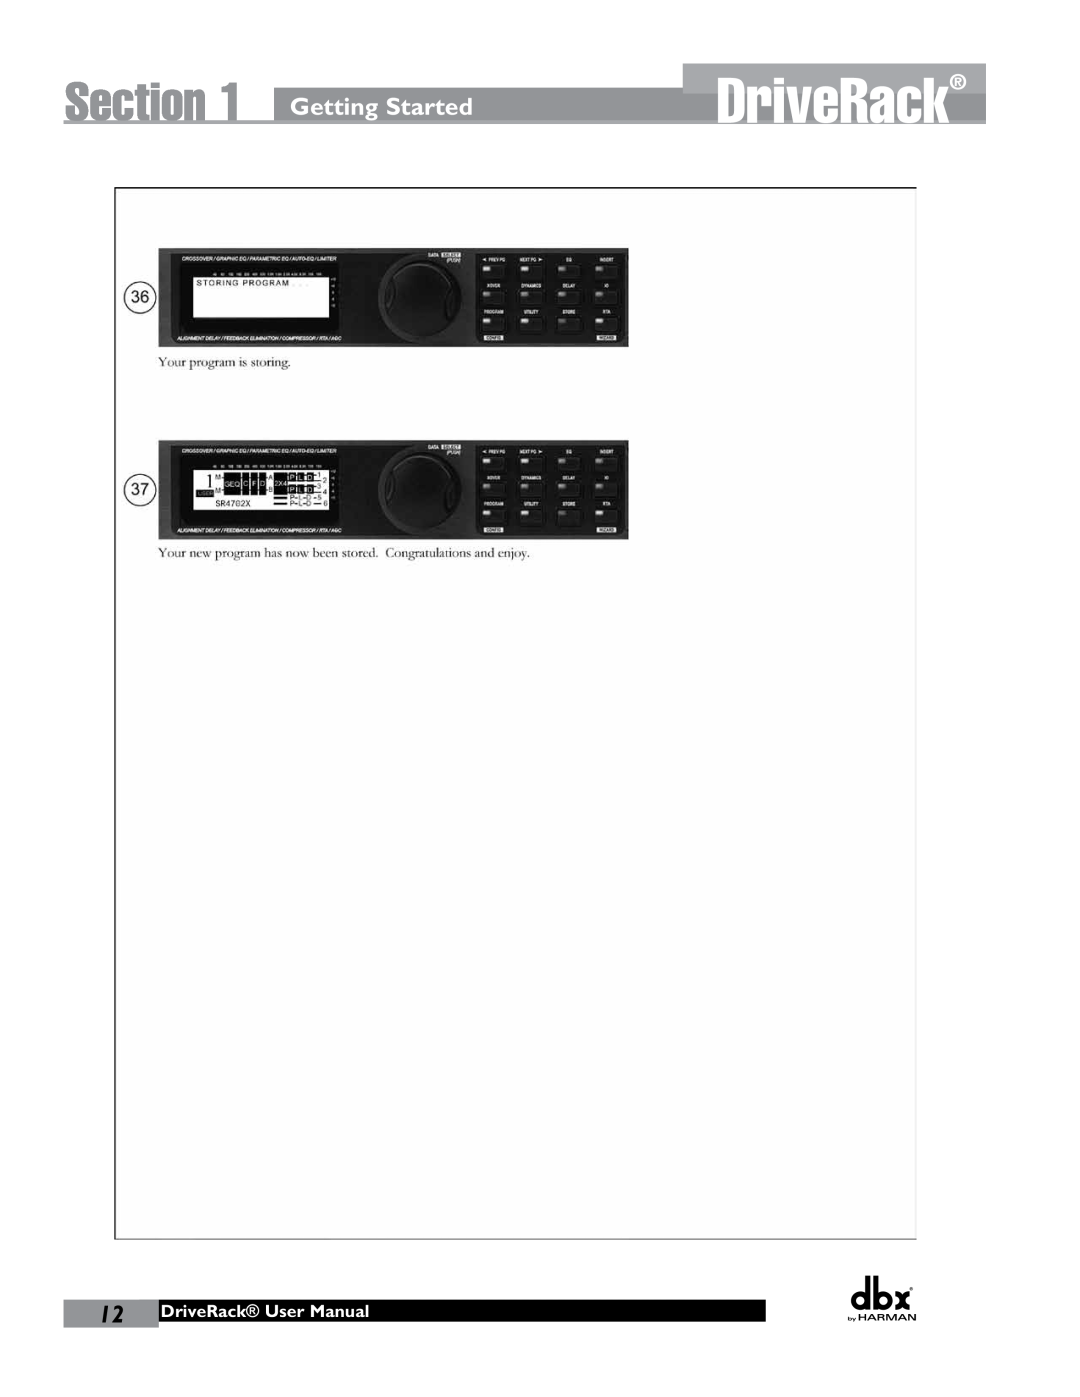 JBL 260 user manual Section, Getting Started, DriveRack User Manual 